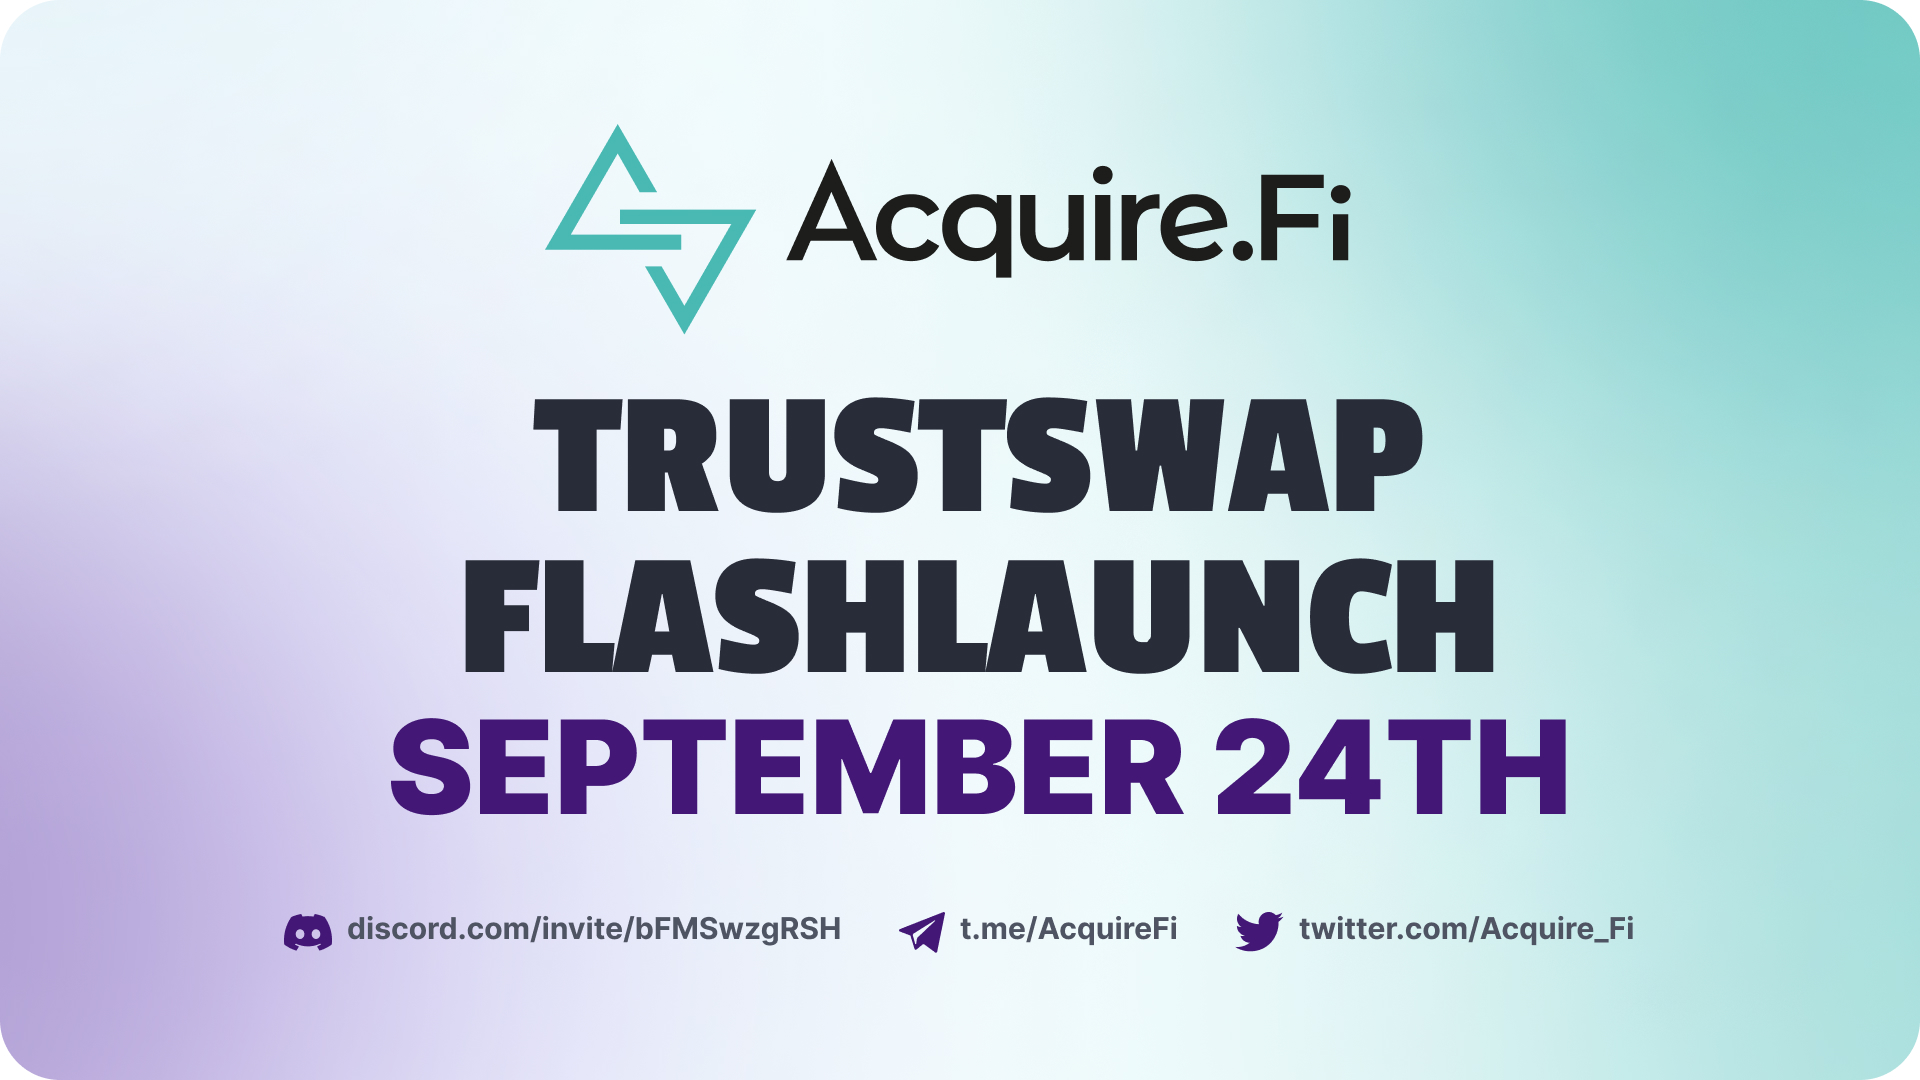 Acquire.Fi Announces September 24th FlashLaunch on TrustSwap Launchpad